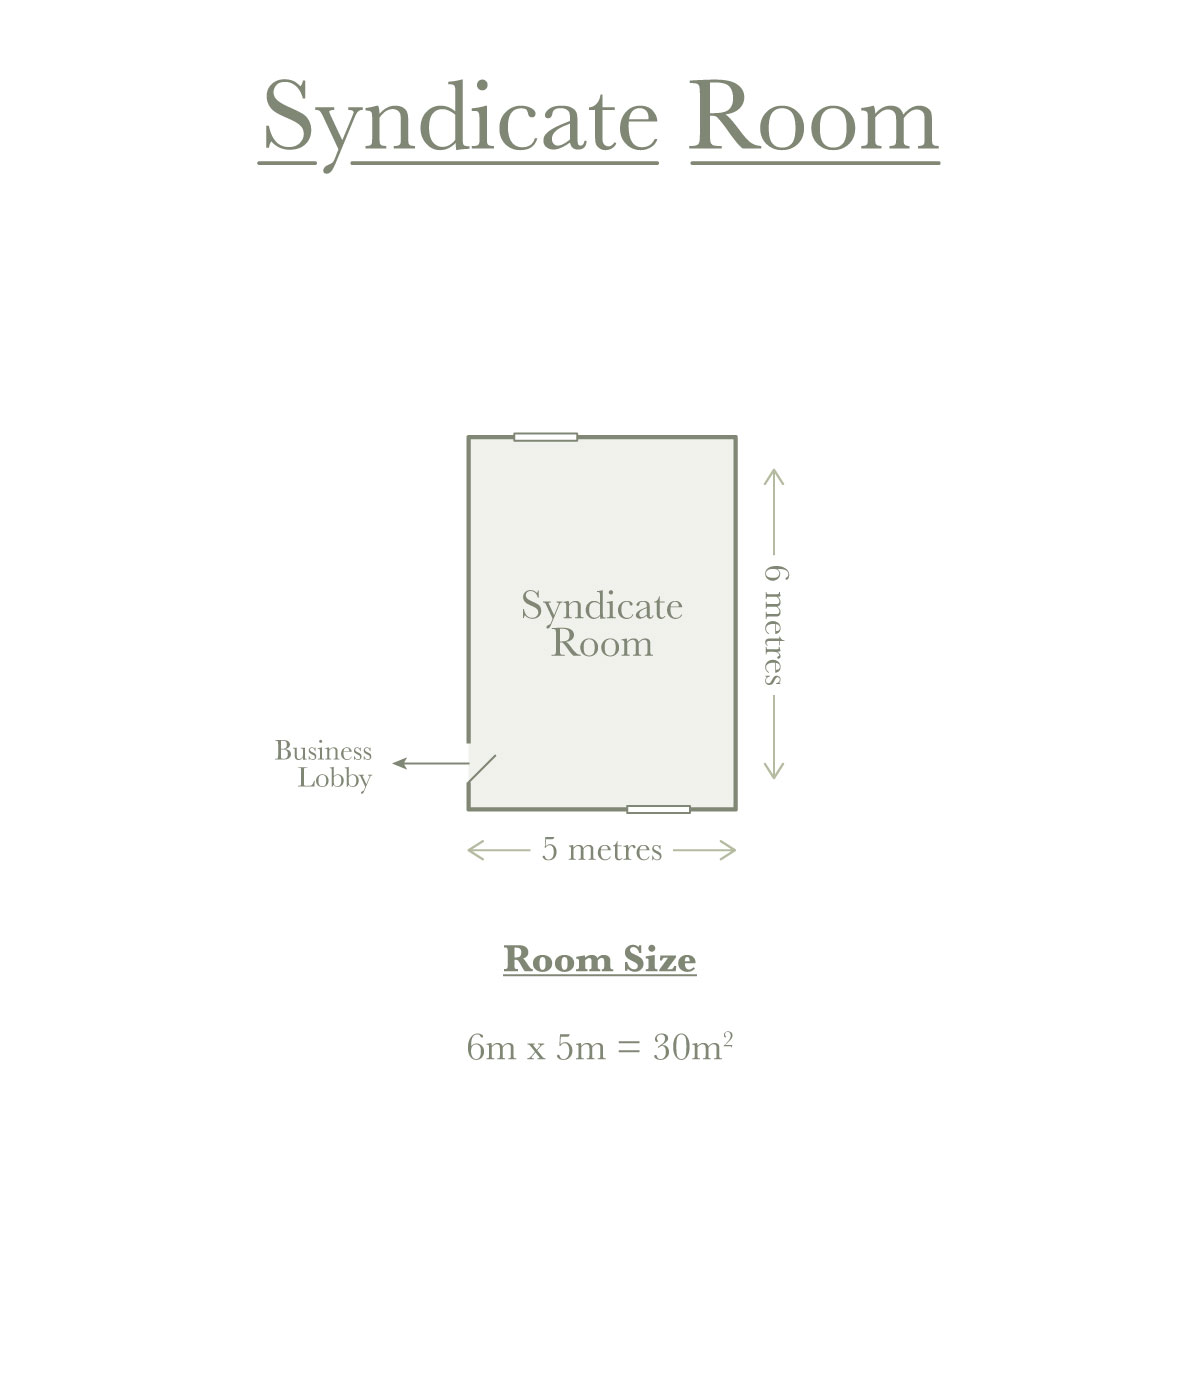 Syndicate Room Plan with Measurements